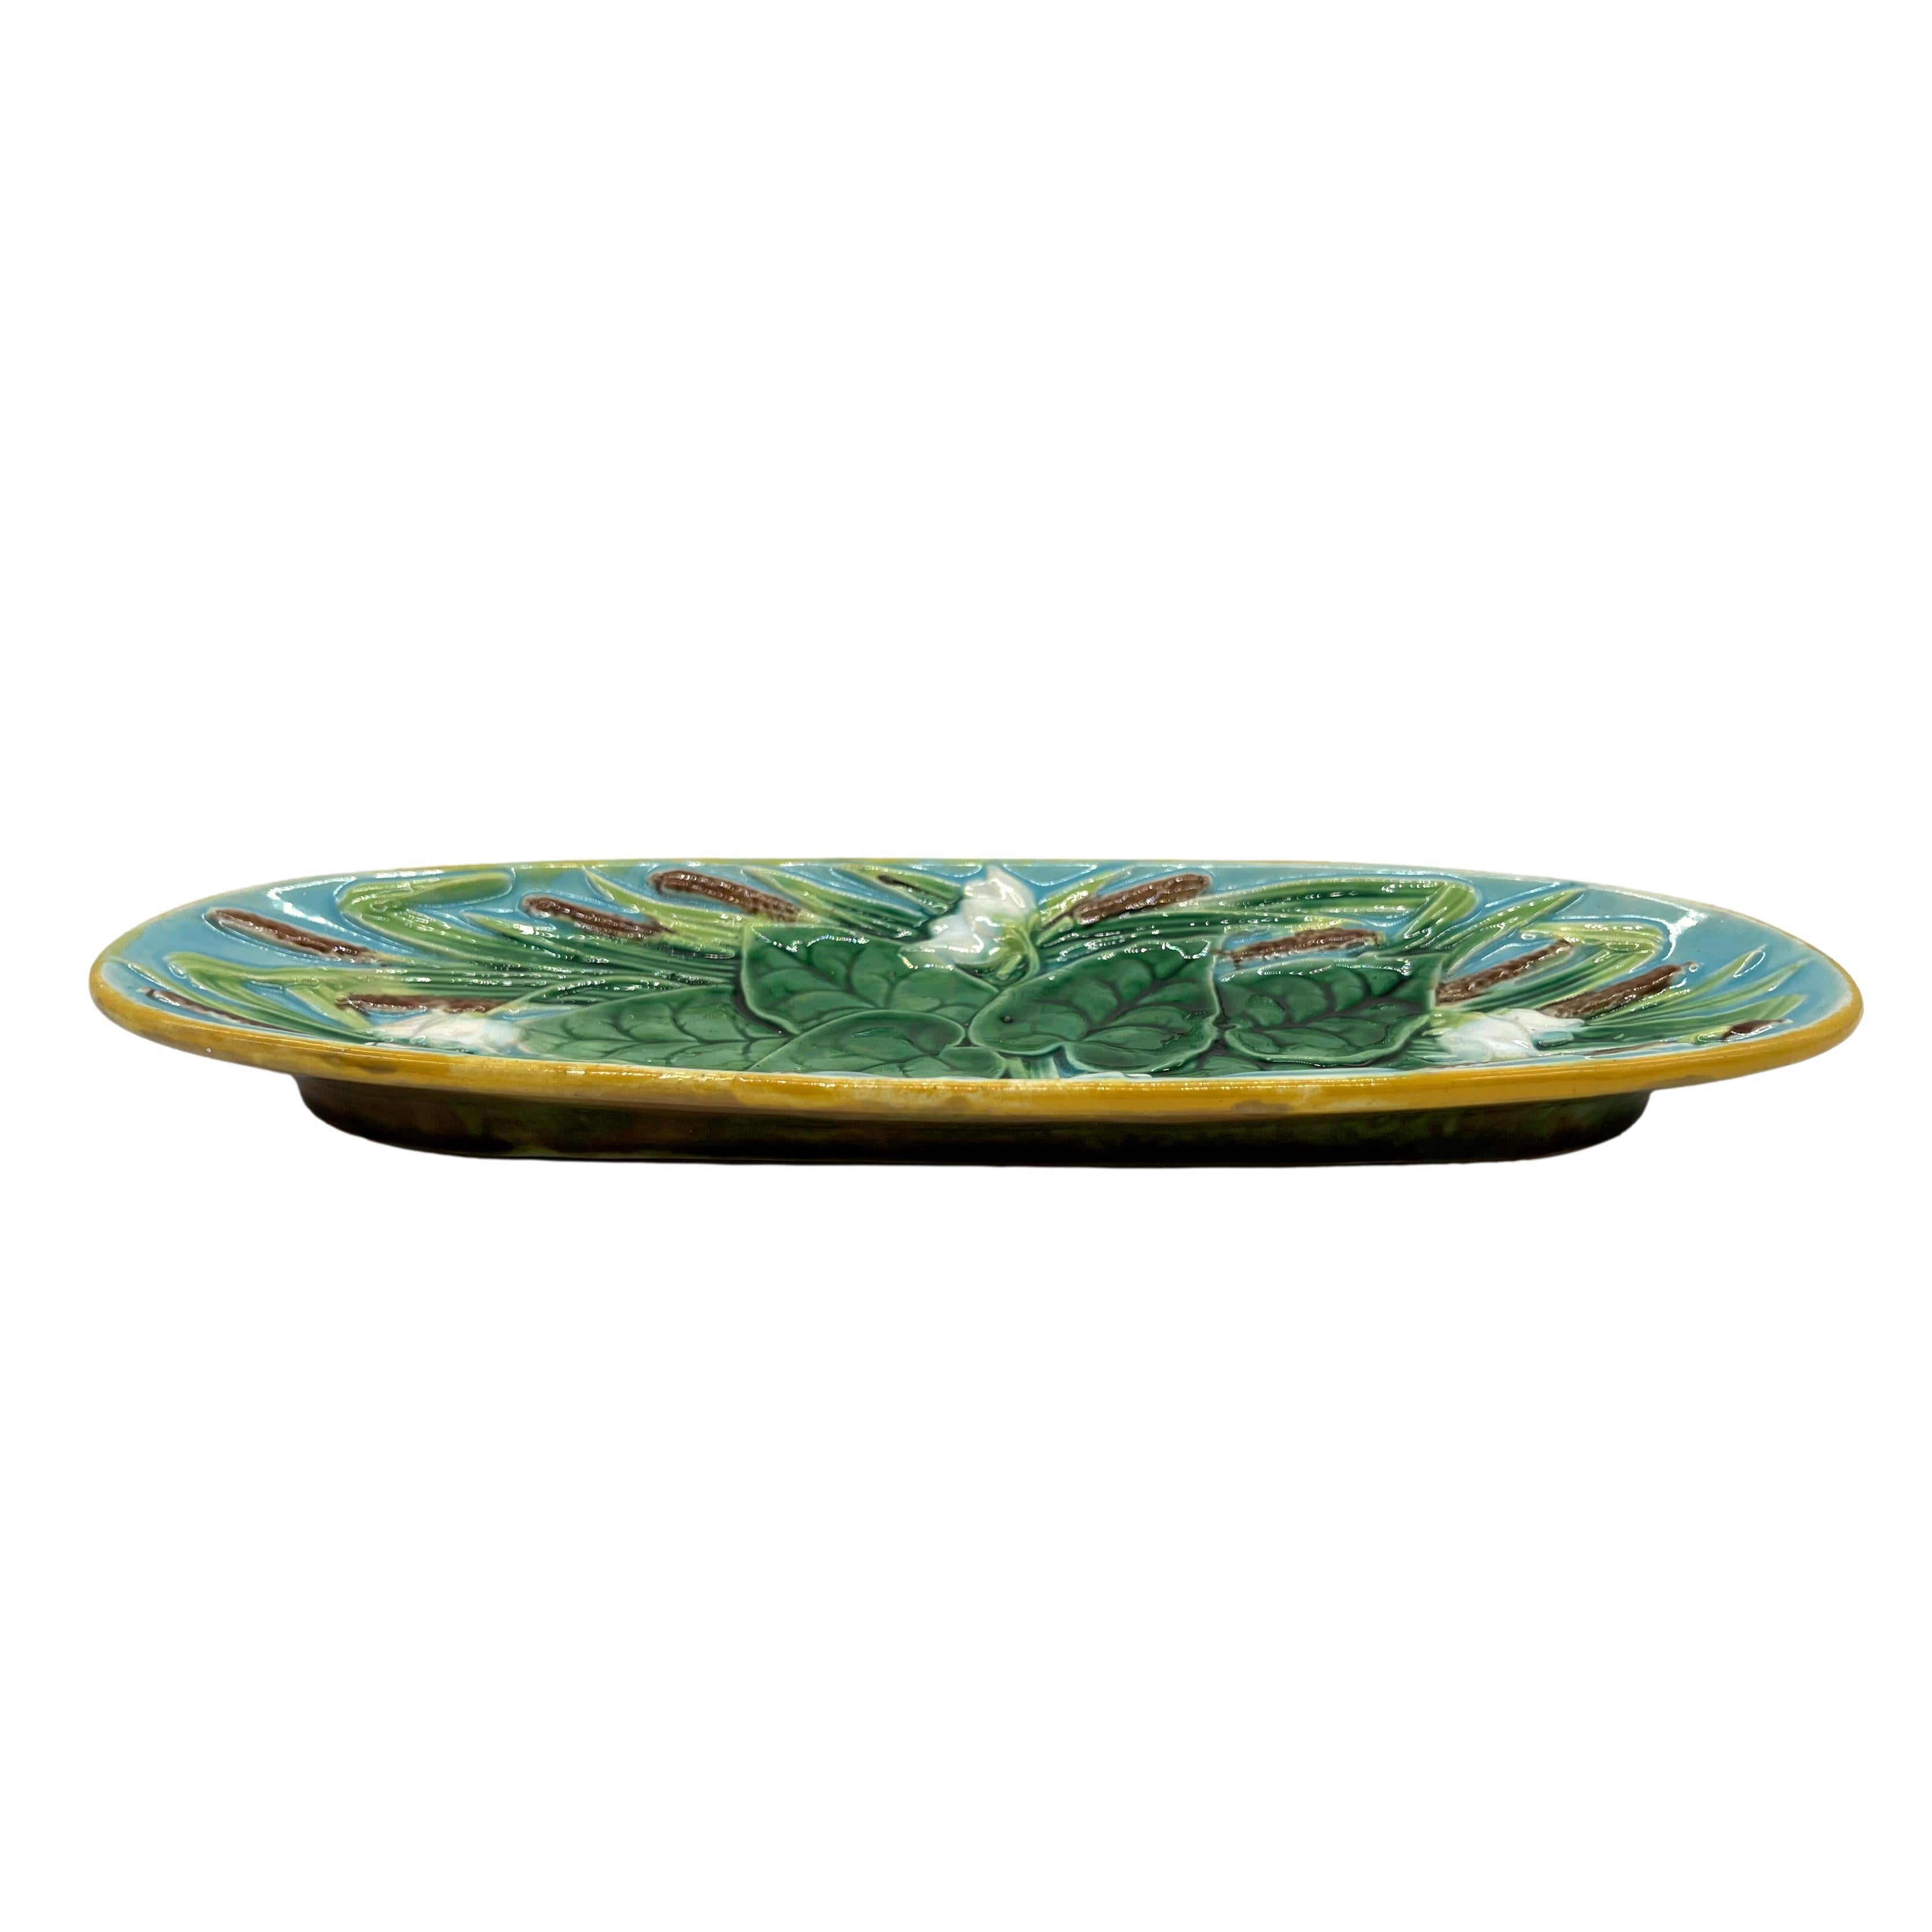 George Jones Majolica Pond Lilies and Bullrushes 10-in Tray, English, c. 1875 In Good Condition For Sale In Banner Elk, NC